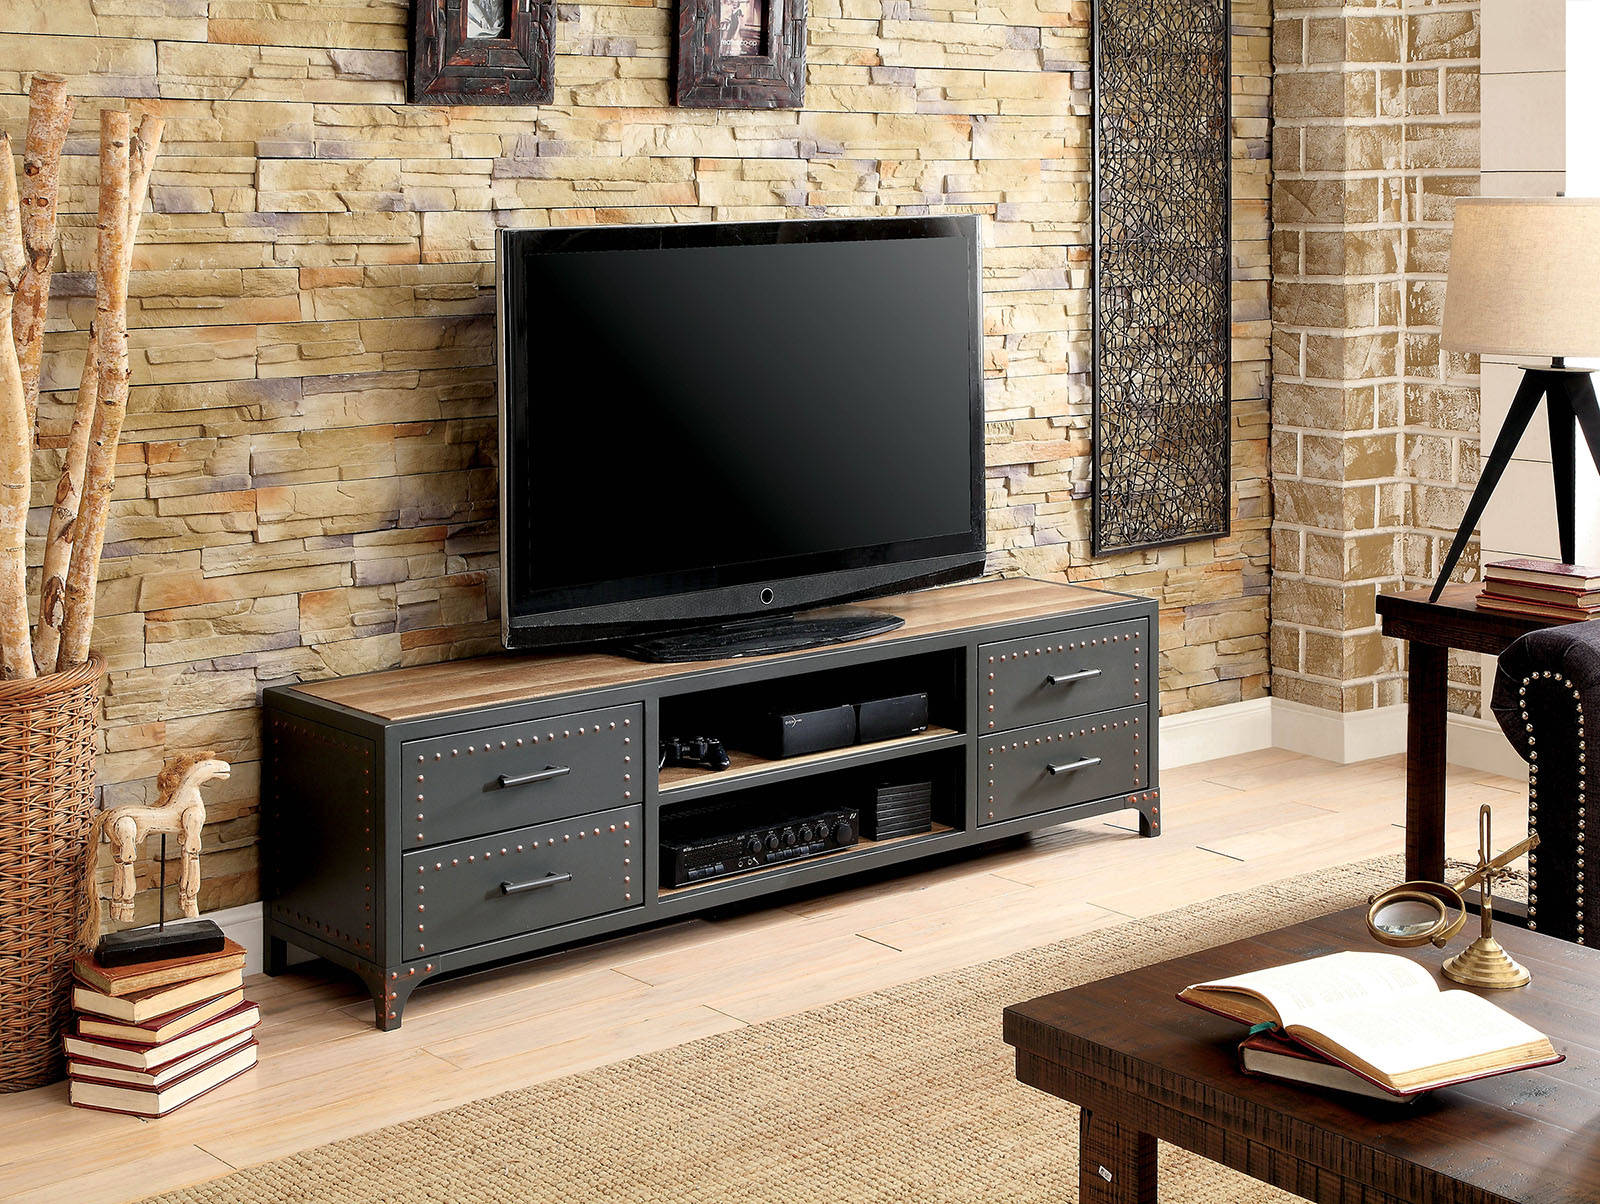 Where To Buy Black TV Stands 60 Inch At A Low Price